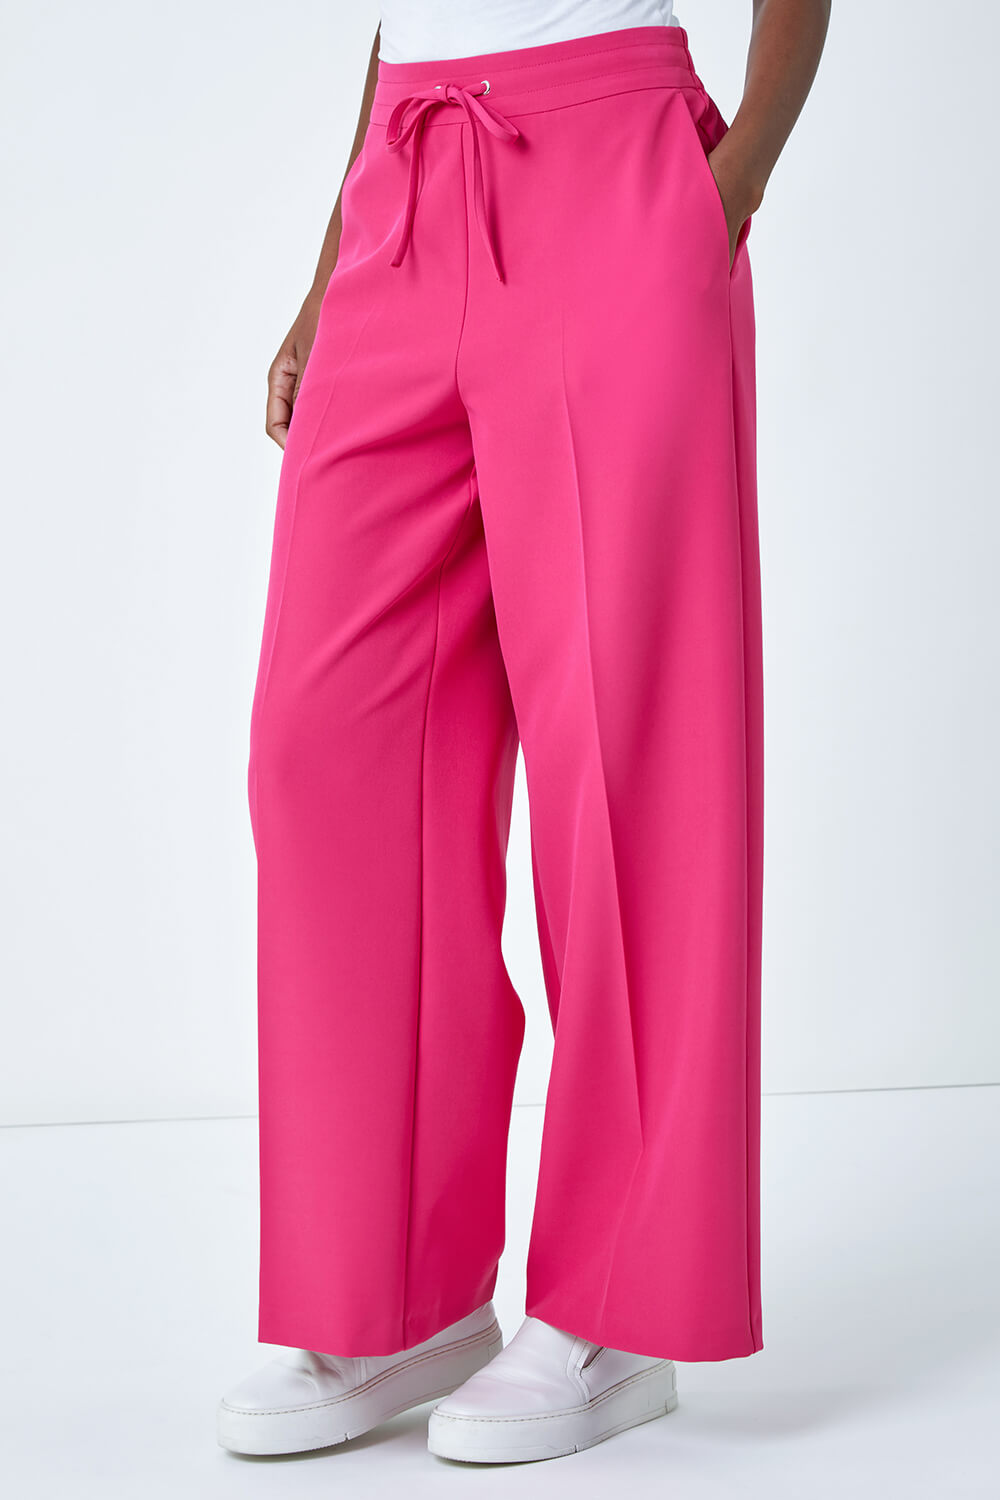 PINK Wide Leg Tie Front Trouser, Image 5 of 5